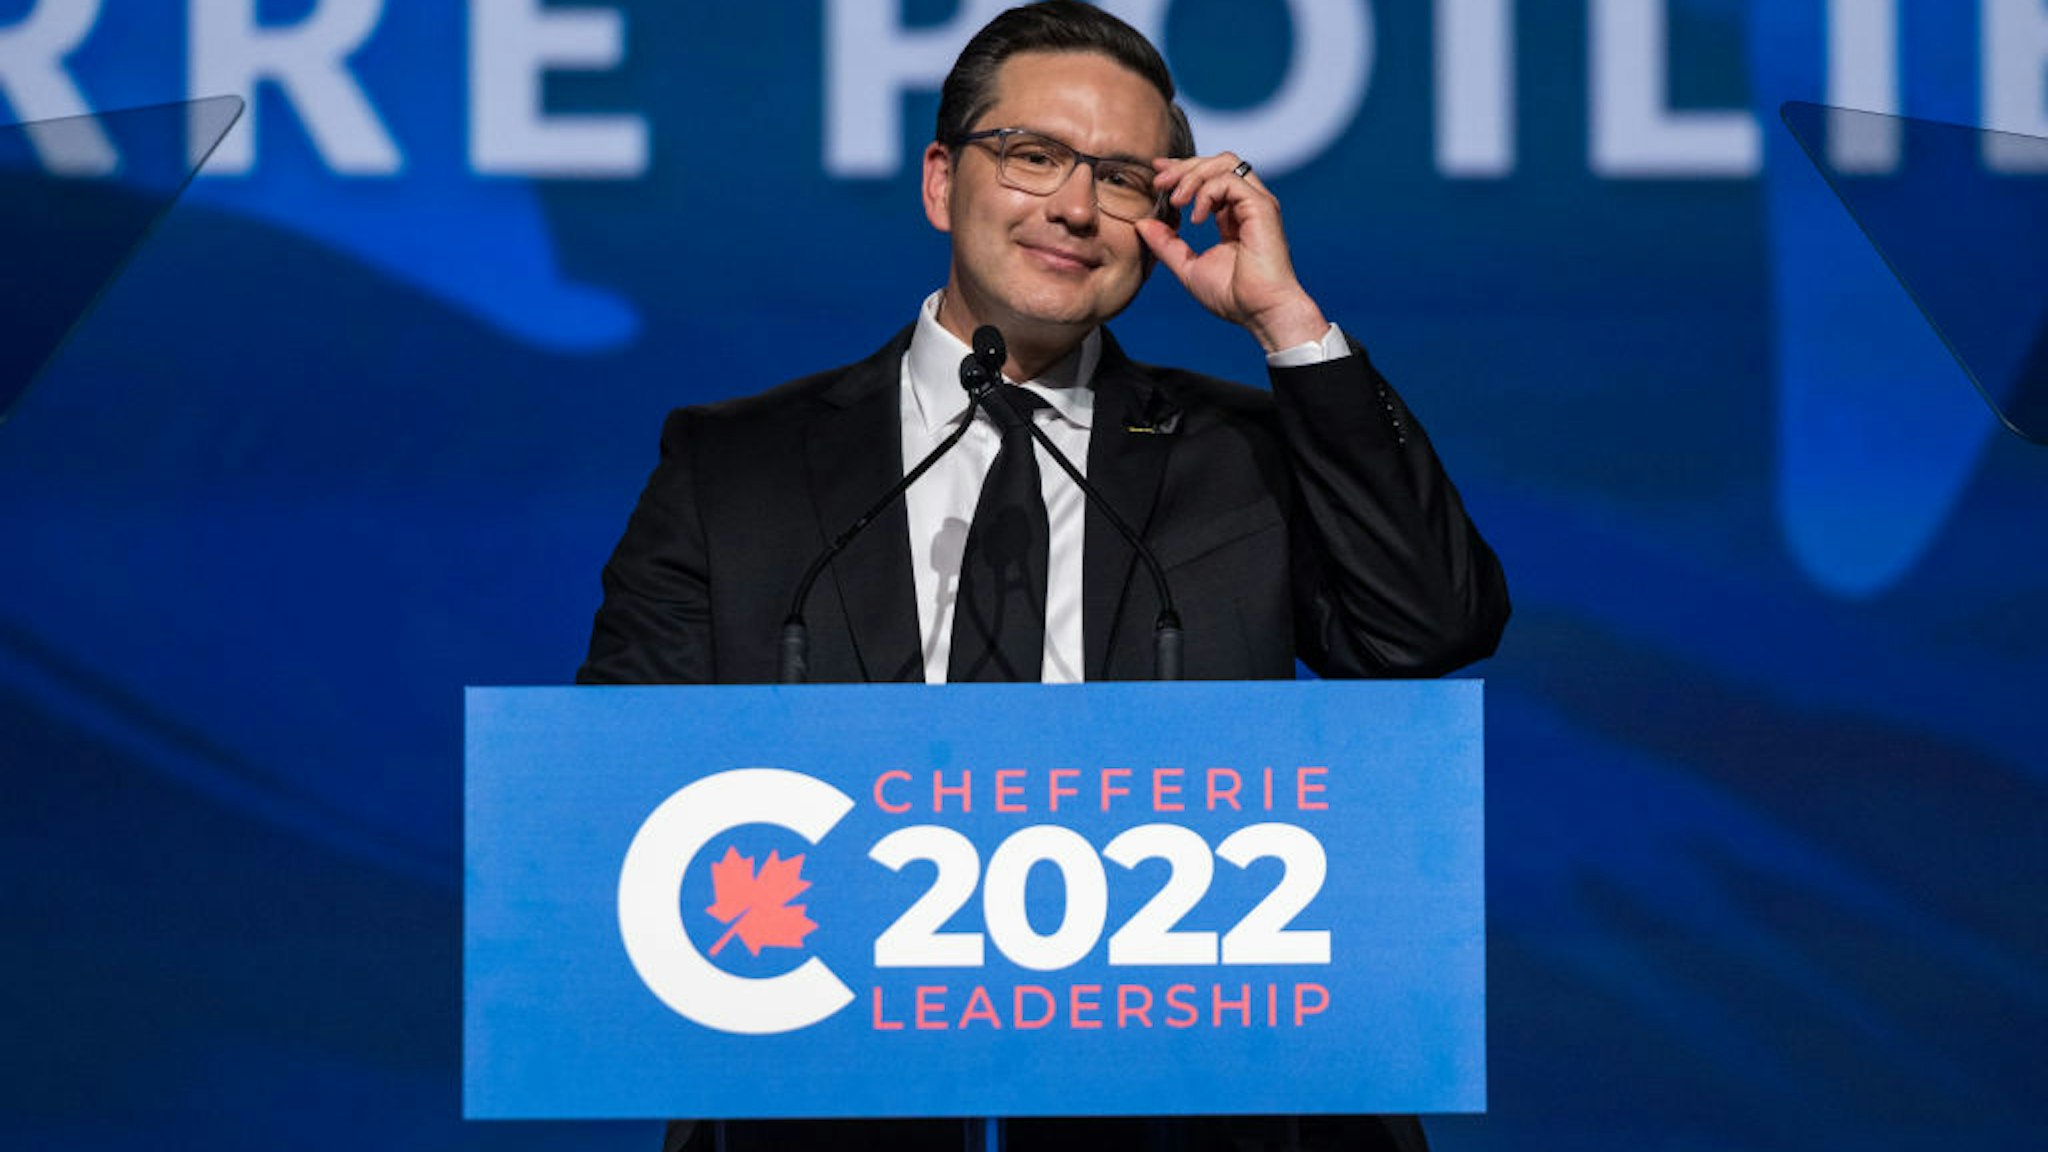 Pierre Poilievre, newly-elected leader of Canada's Conservative Party, speaks to the crowd after winning the leadership race during a Conservative Party of Canada leadership event at the Shaw Centre in Ottawa, Ontario, Canada, on Saturday, Sept. 10, 2022. Canadas opposition Conservatives elected 43-year-old firebrand Pierre Poilievre as the main rival to Prime Minister Justin Trudeau. Photographer: James Park/Bloomberg via Getty Images